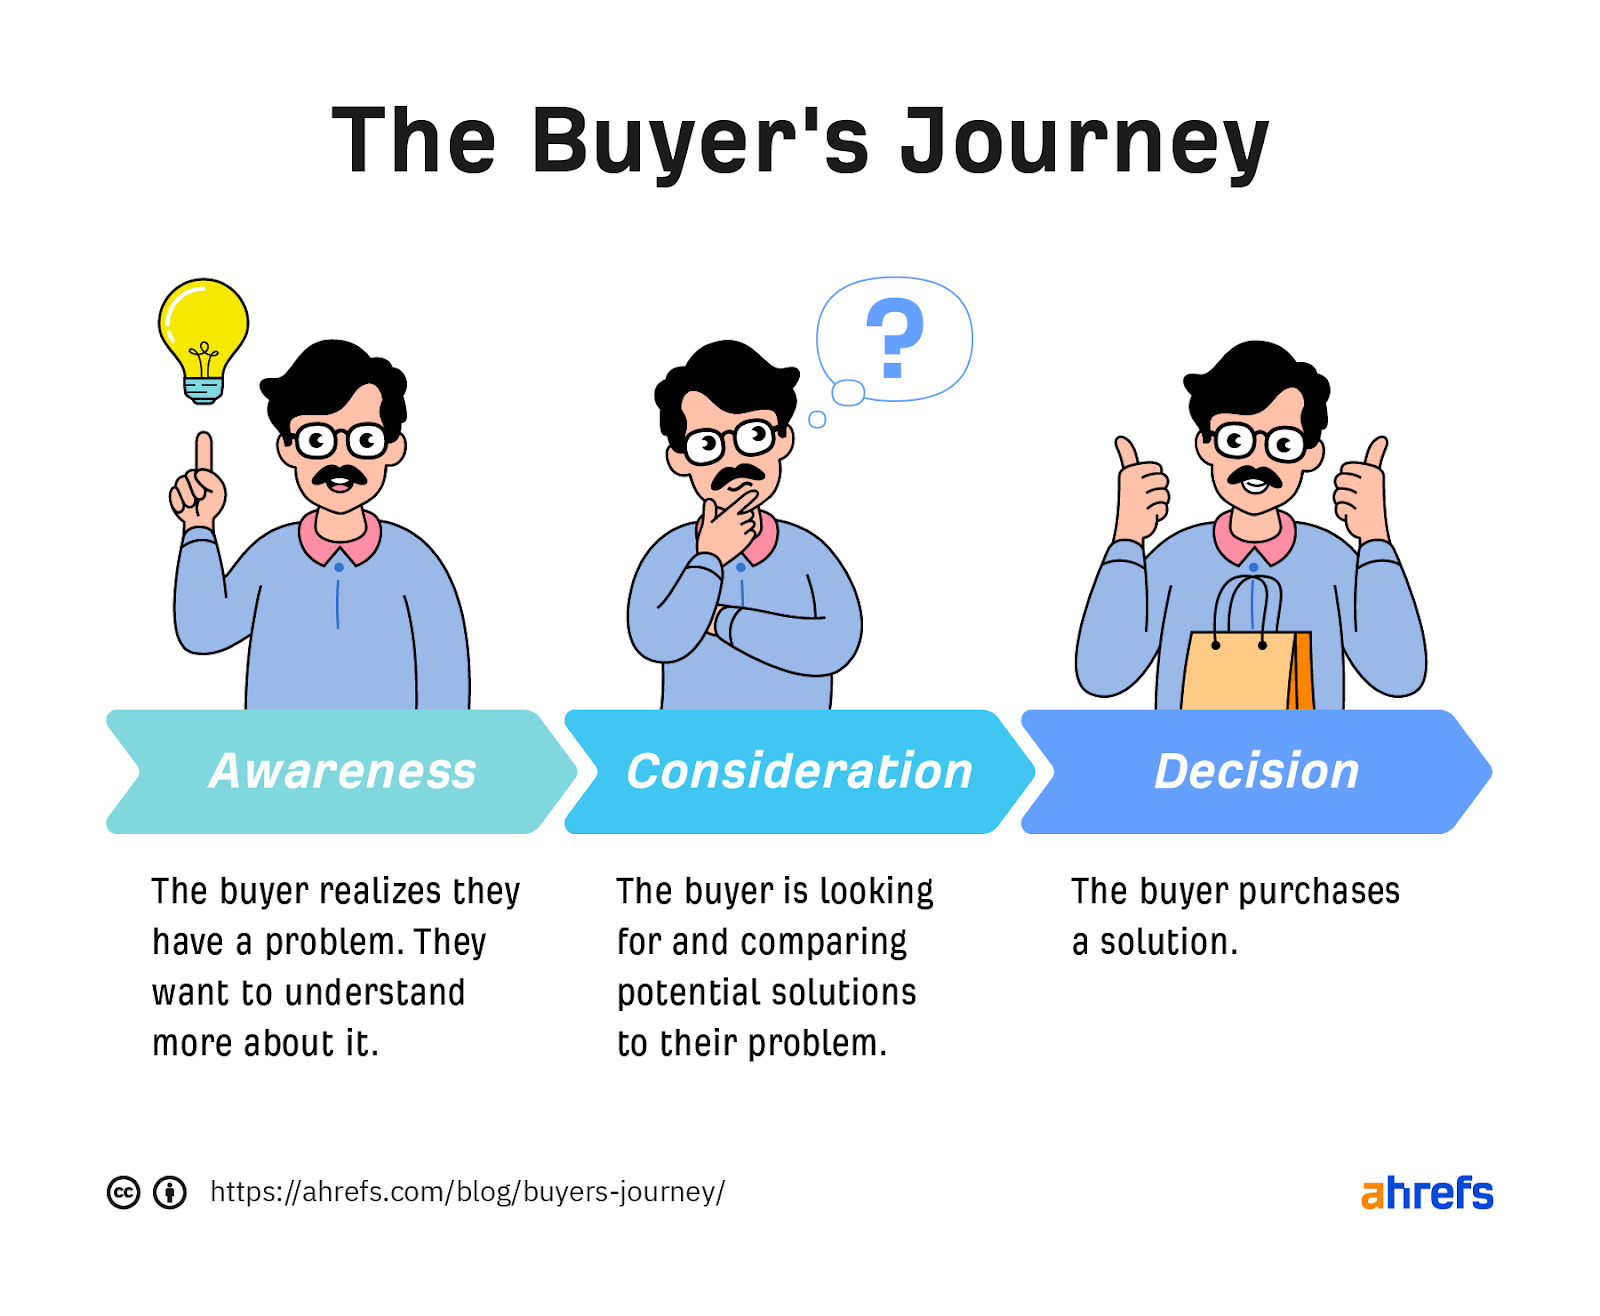 Infographic of three stages of buyer's journey: awareness, consideration, and decision